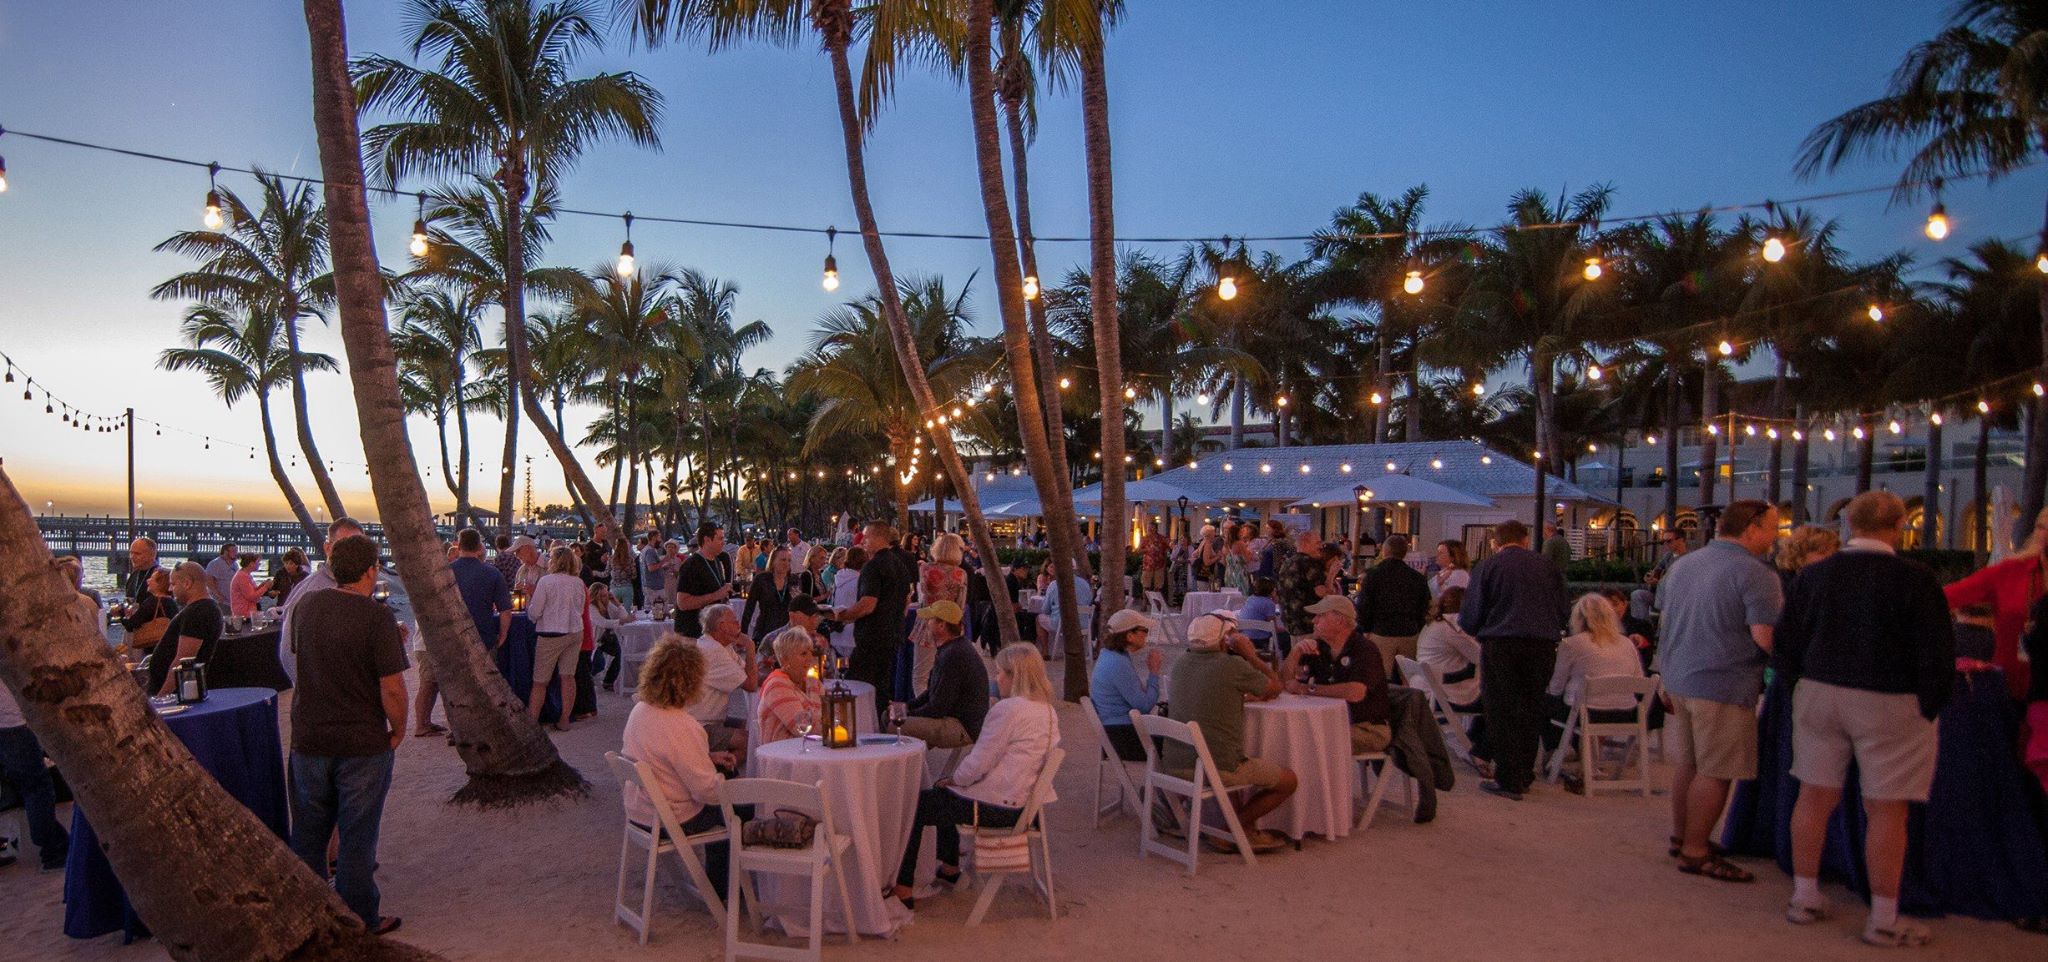 Old Town Manor Key West Food & Wine Festival